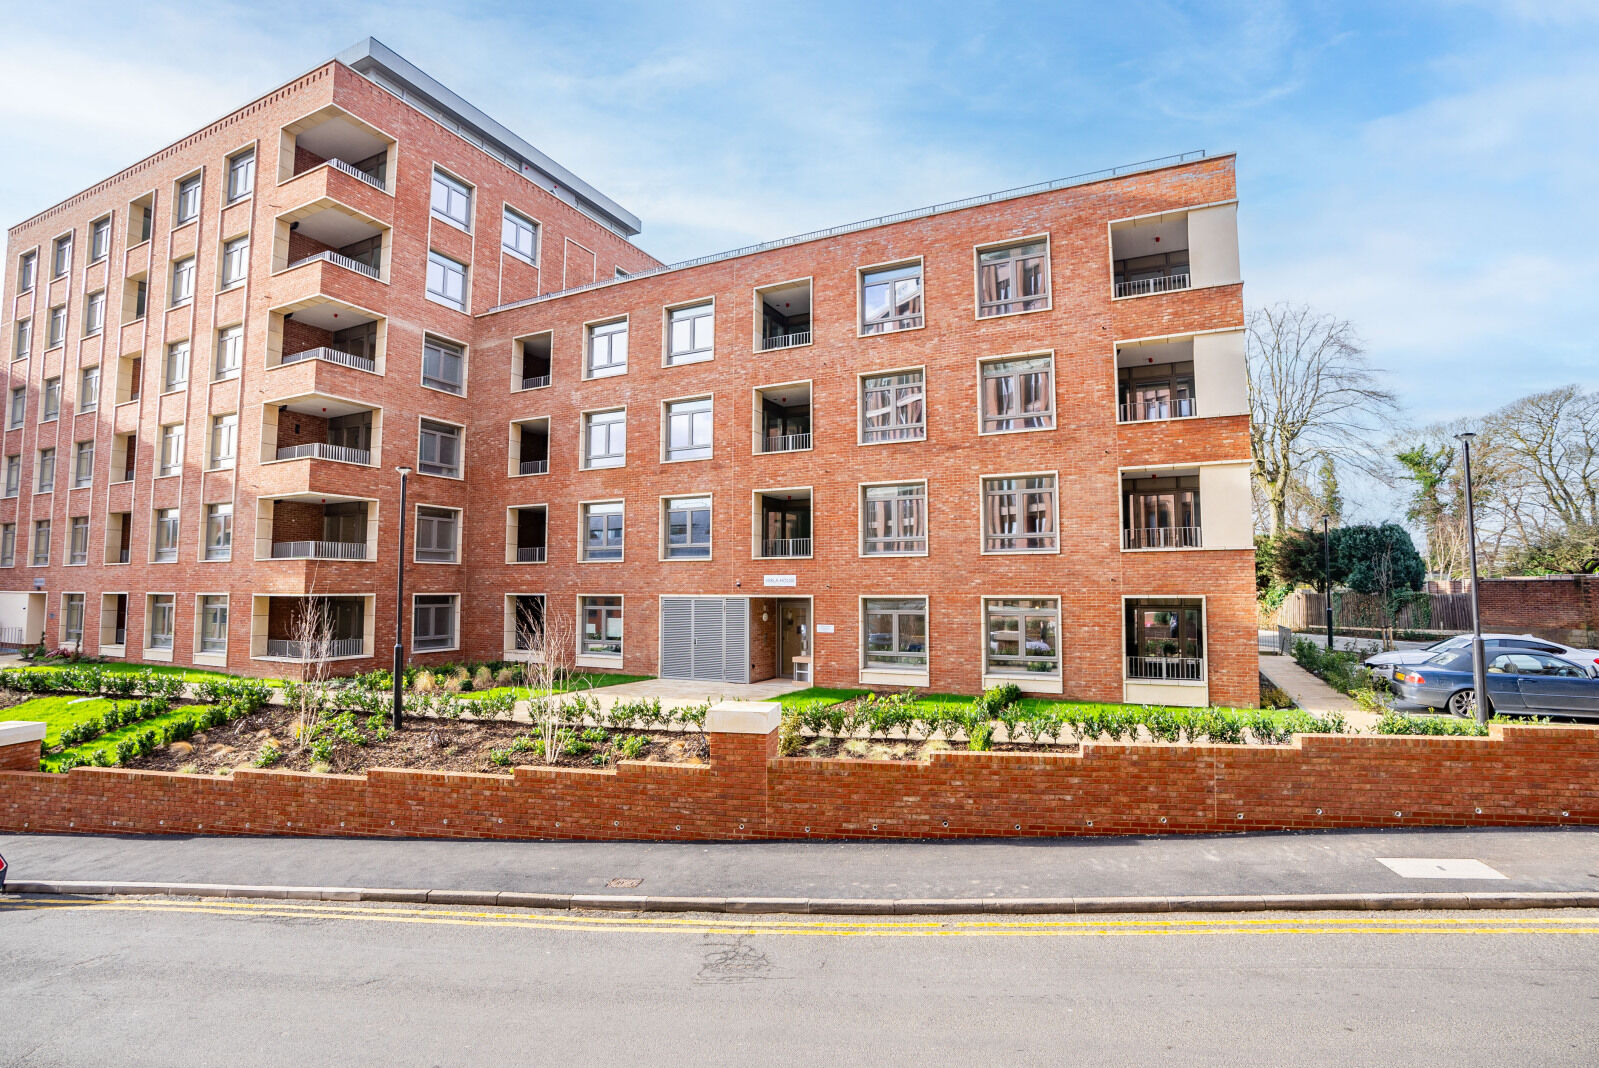 2 bedroom  flat to rent, Available now Grosvenor Road, St. Albans, AL1, main image